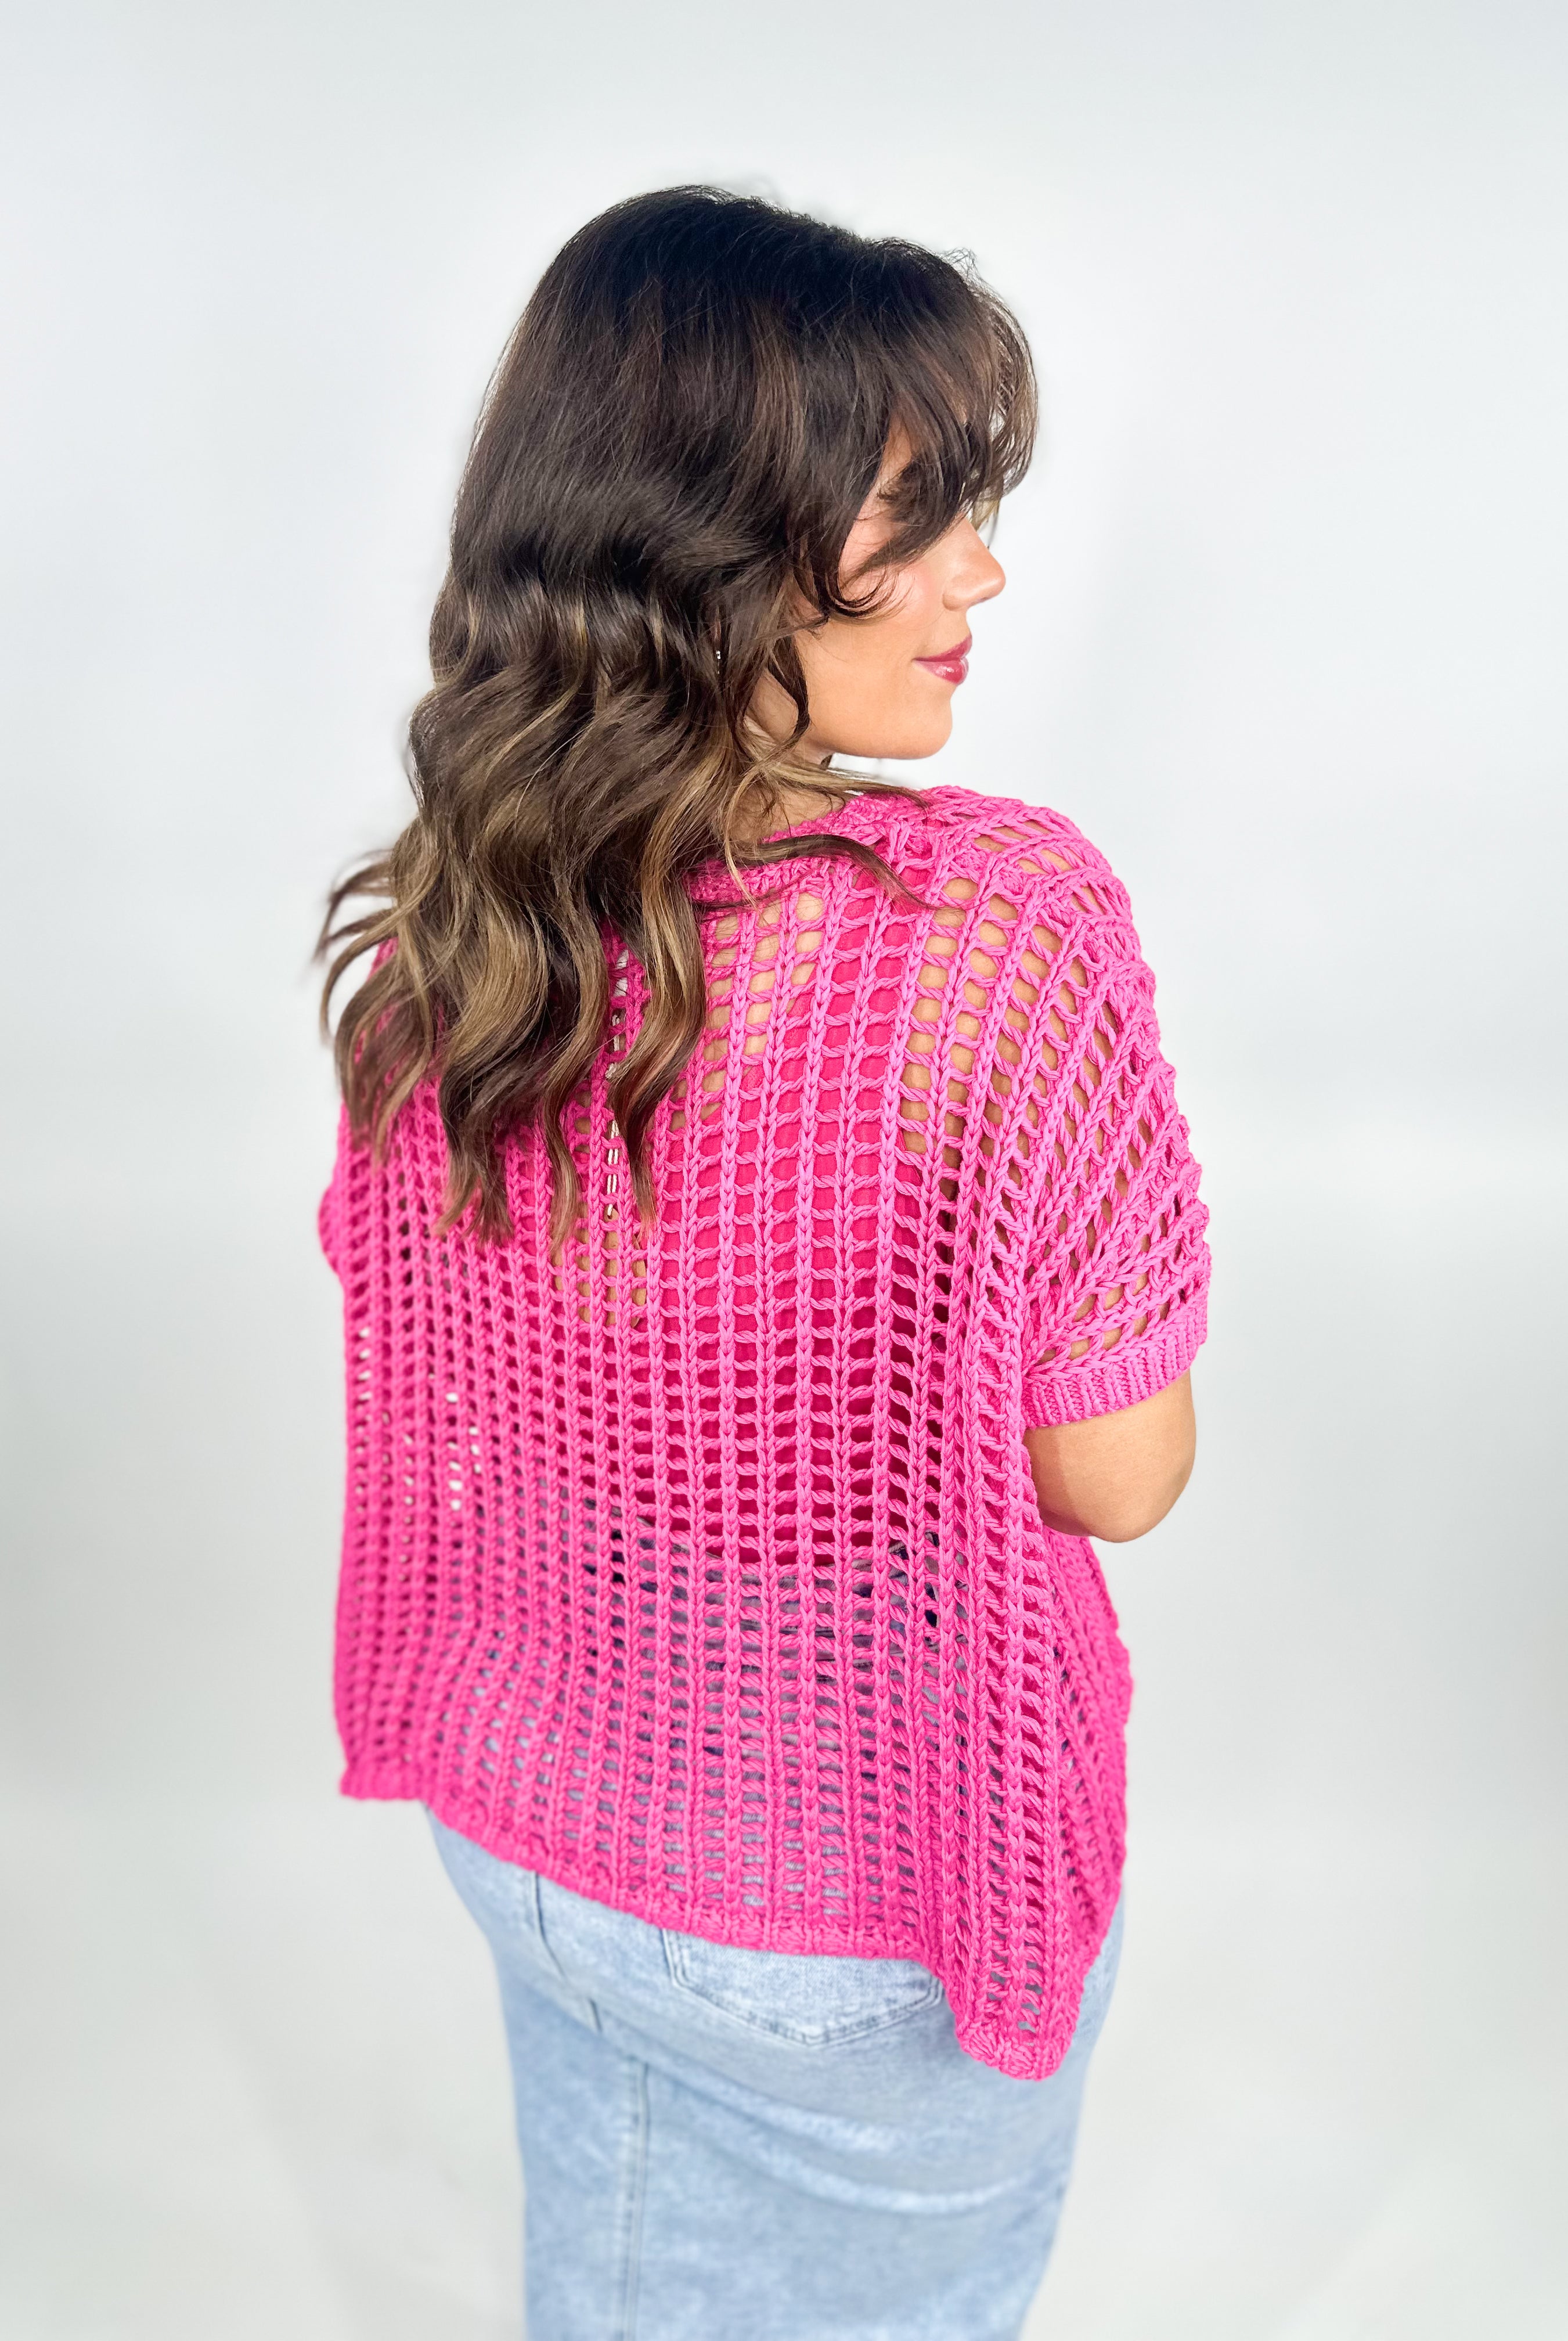 RESTOCK: What a Catch Crochet Top-110 Short Sleeve Top-Bibi-Heathered Boho Boutique, Women's Fashion and Accessories in Palmetto, FL